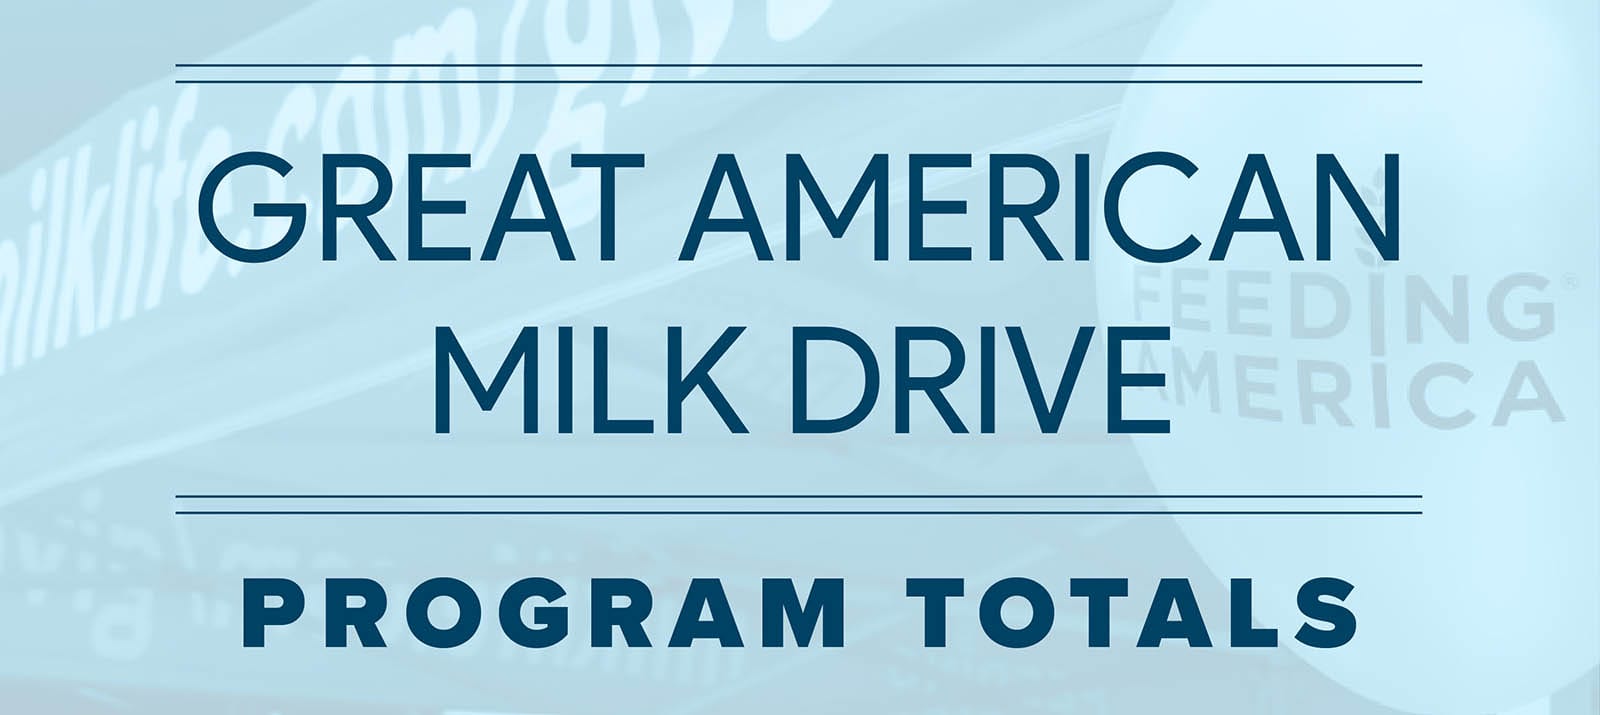 The 2021 Great American Milk Drive has ended!